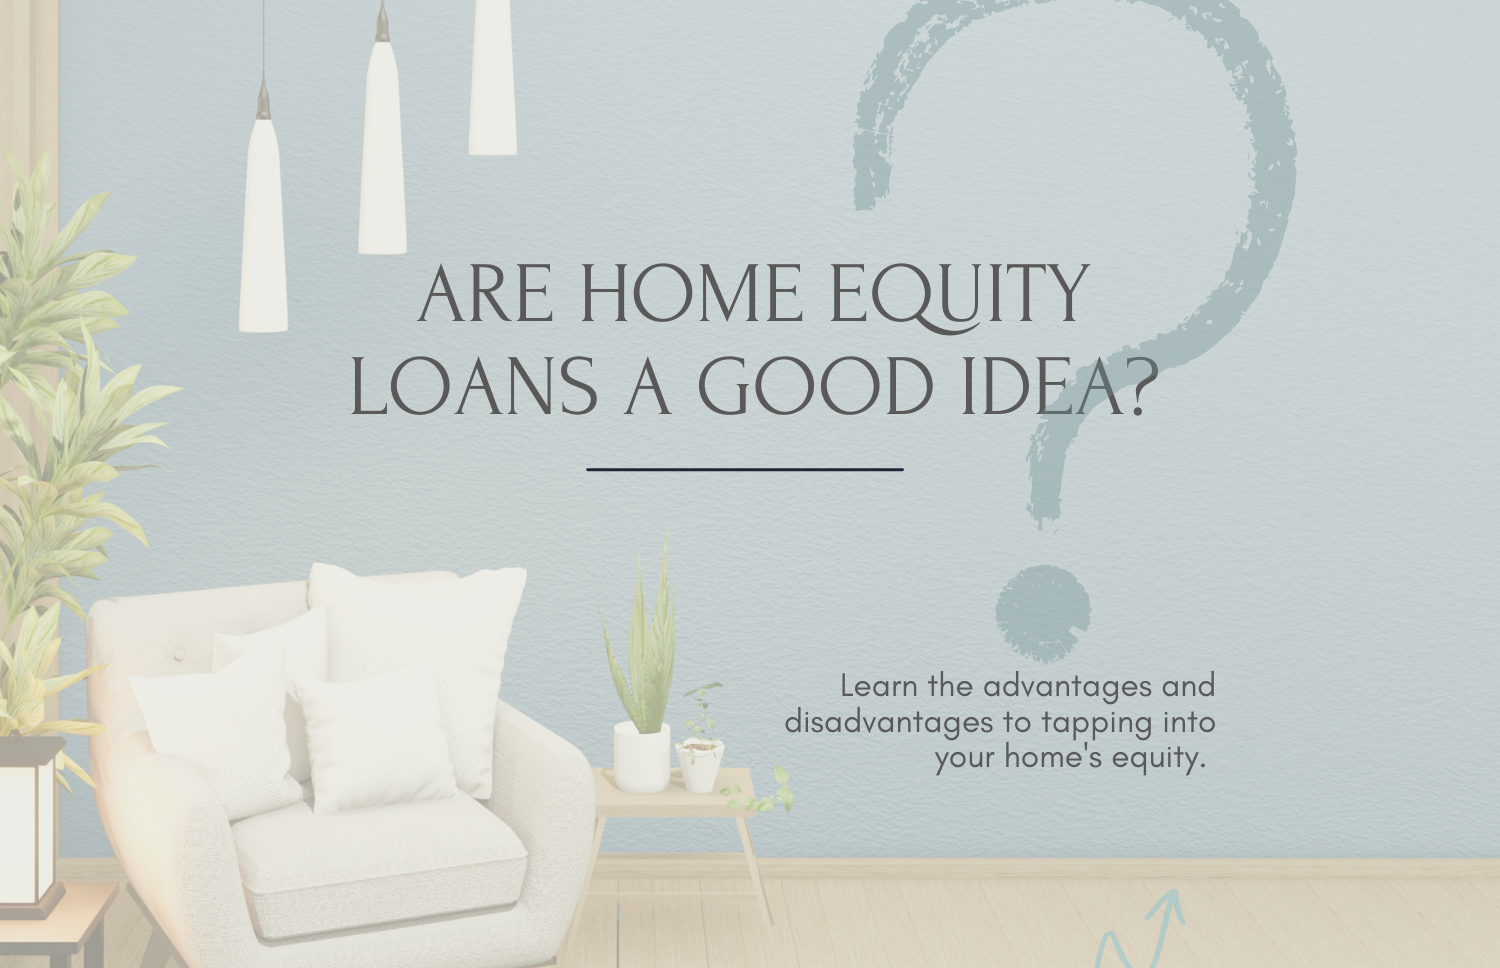 Should You Get a Home Equity Loan or HELOC?